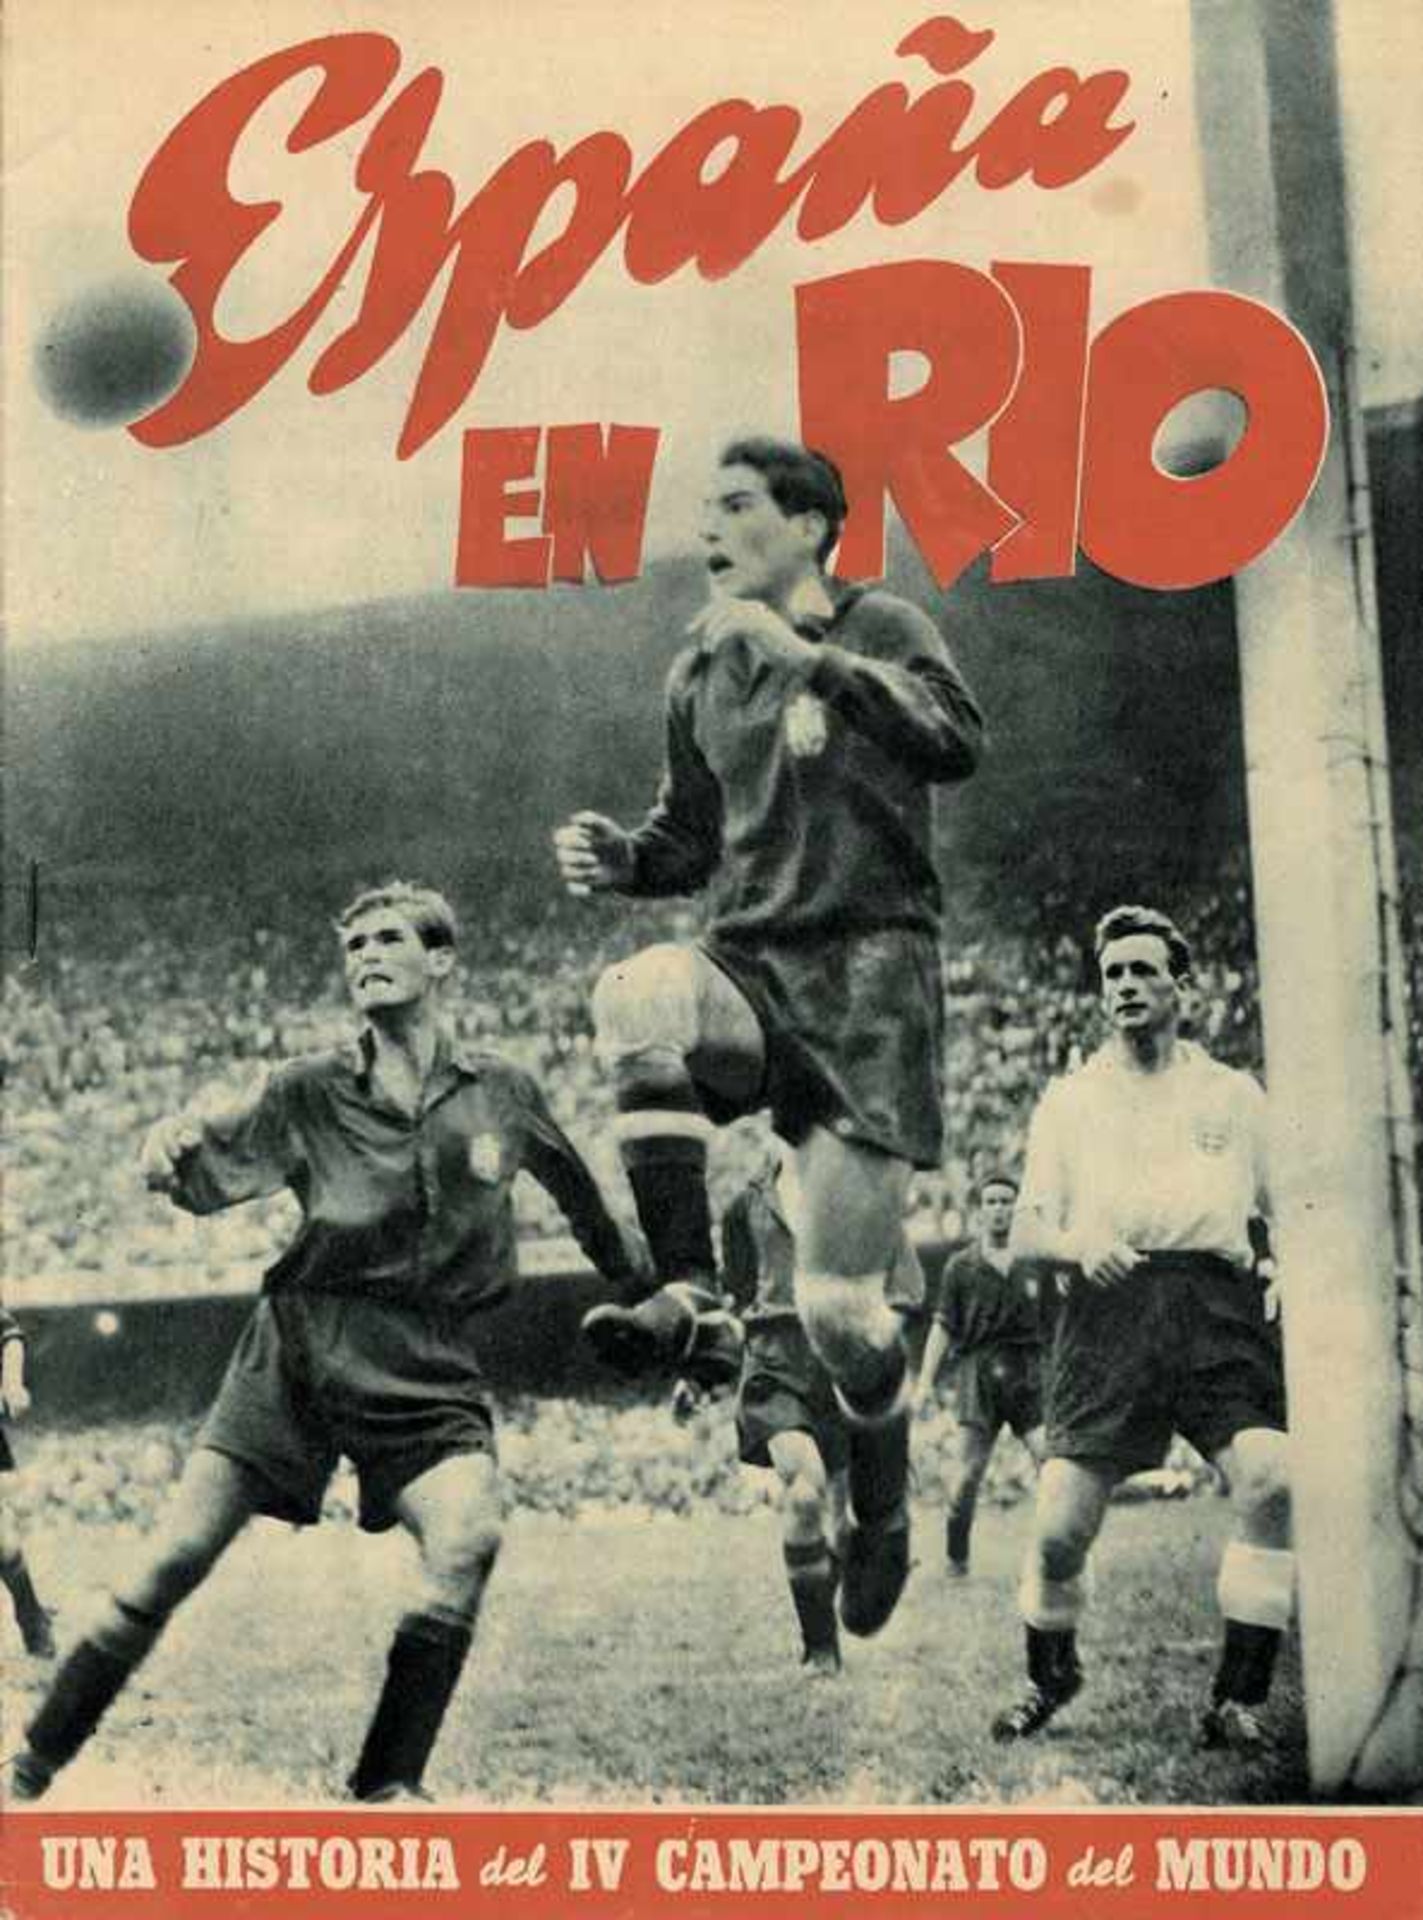 World Cup 1950. Rare Spanish Report - World Cup 1950: Spanish review of the WC 1950 in Brasil.